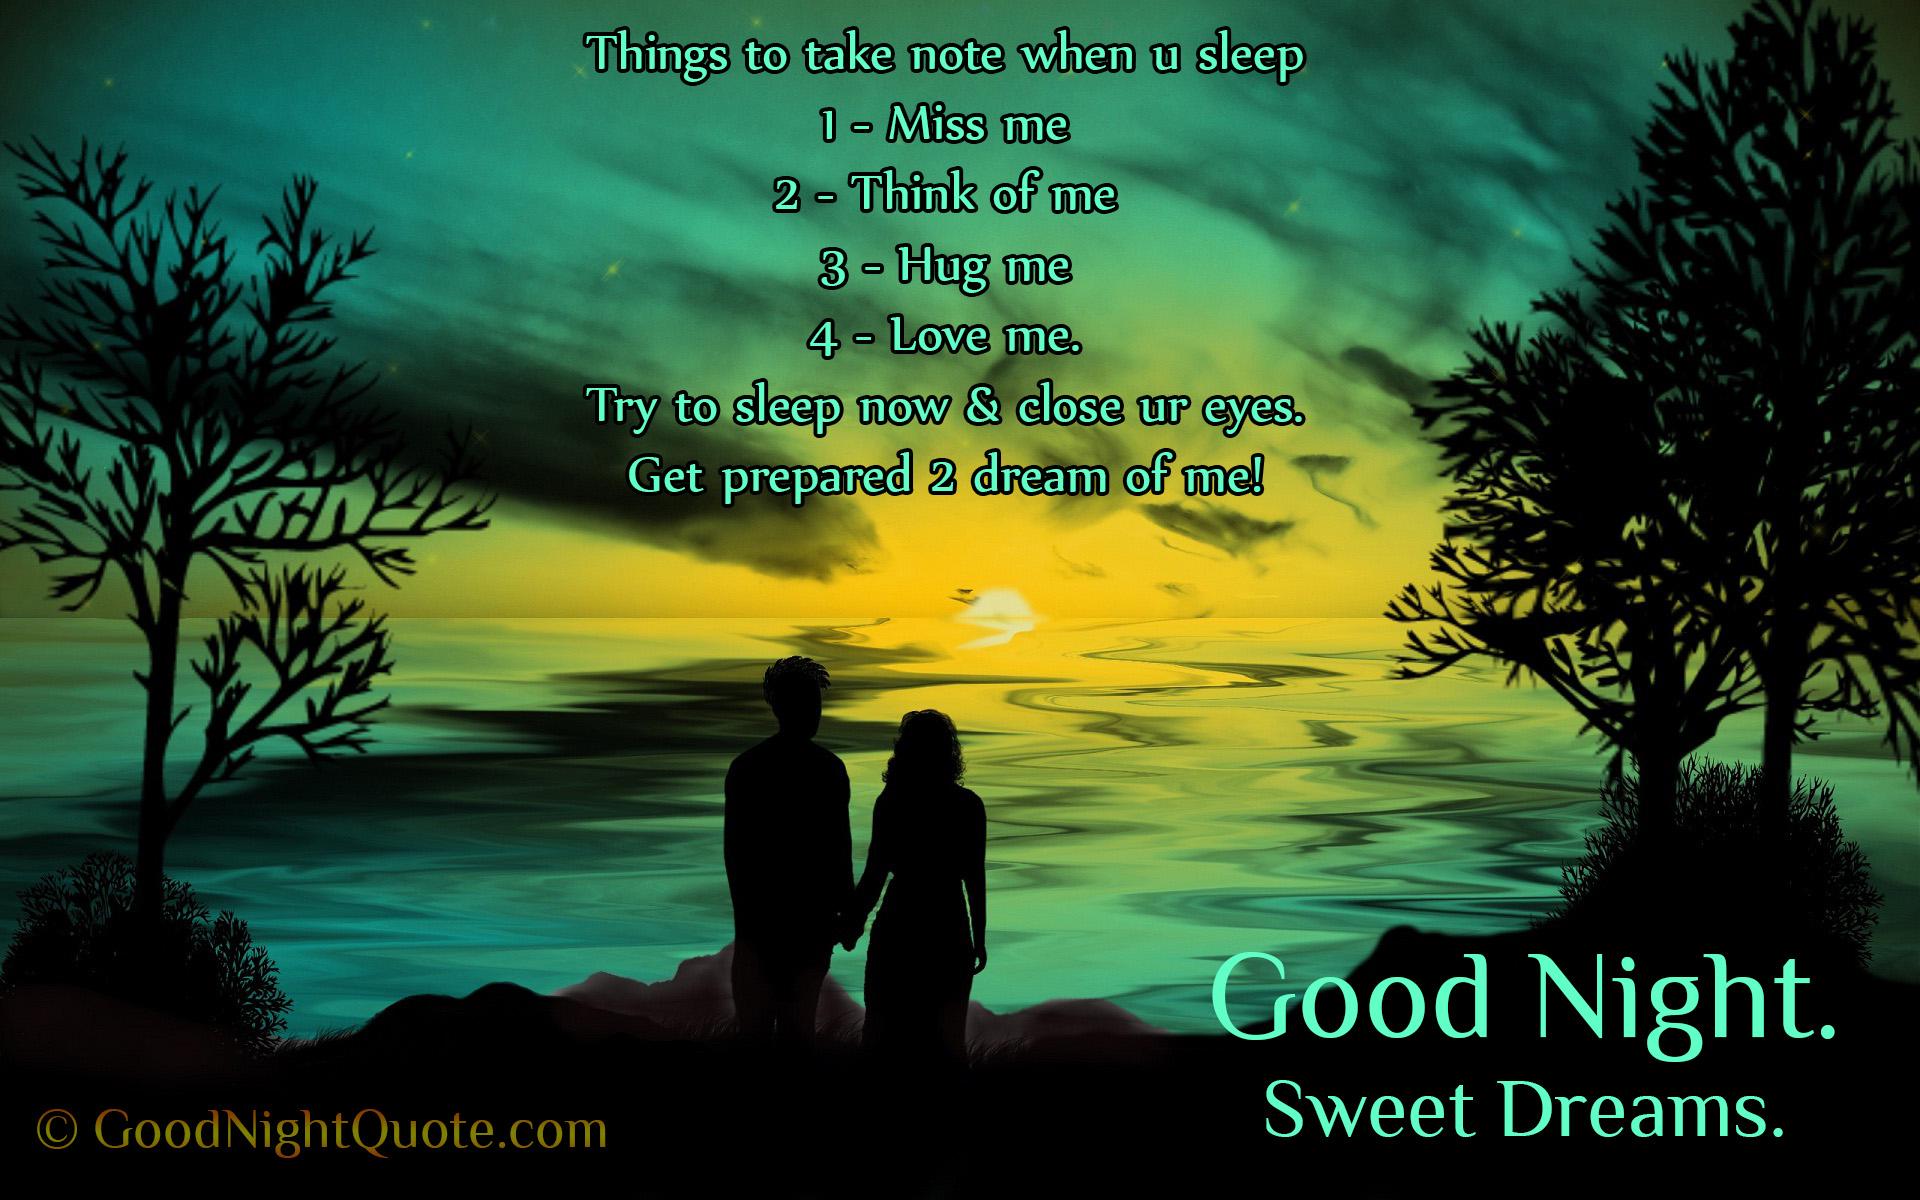 Cute Good Night Image for Love Night Quotes Image